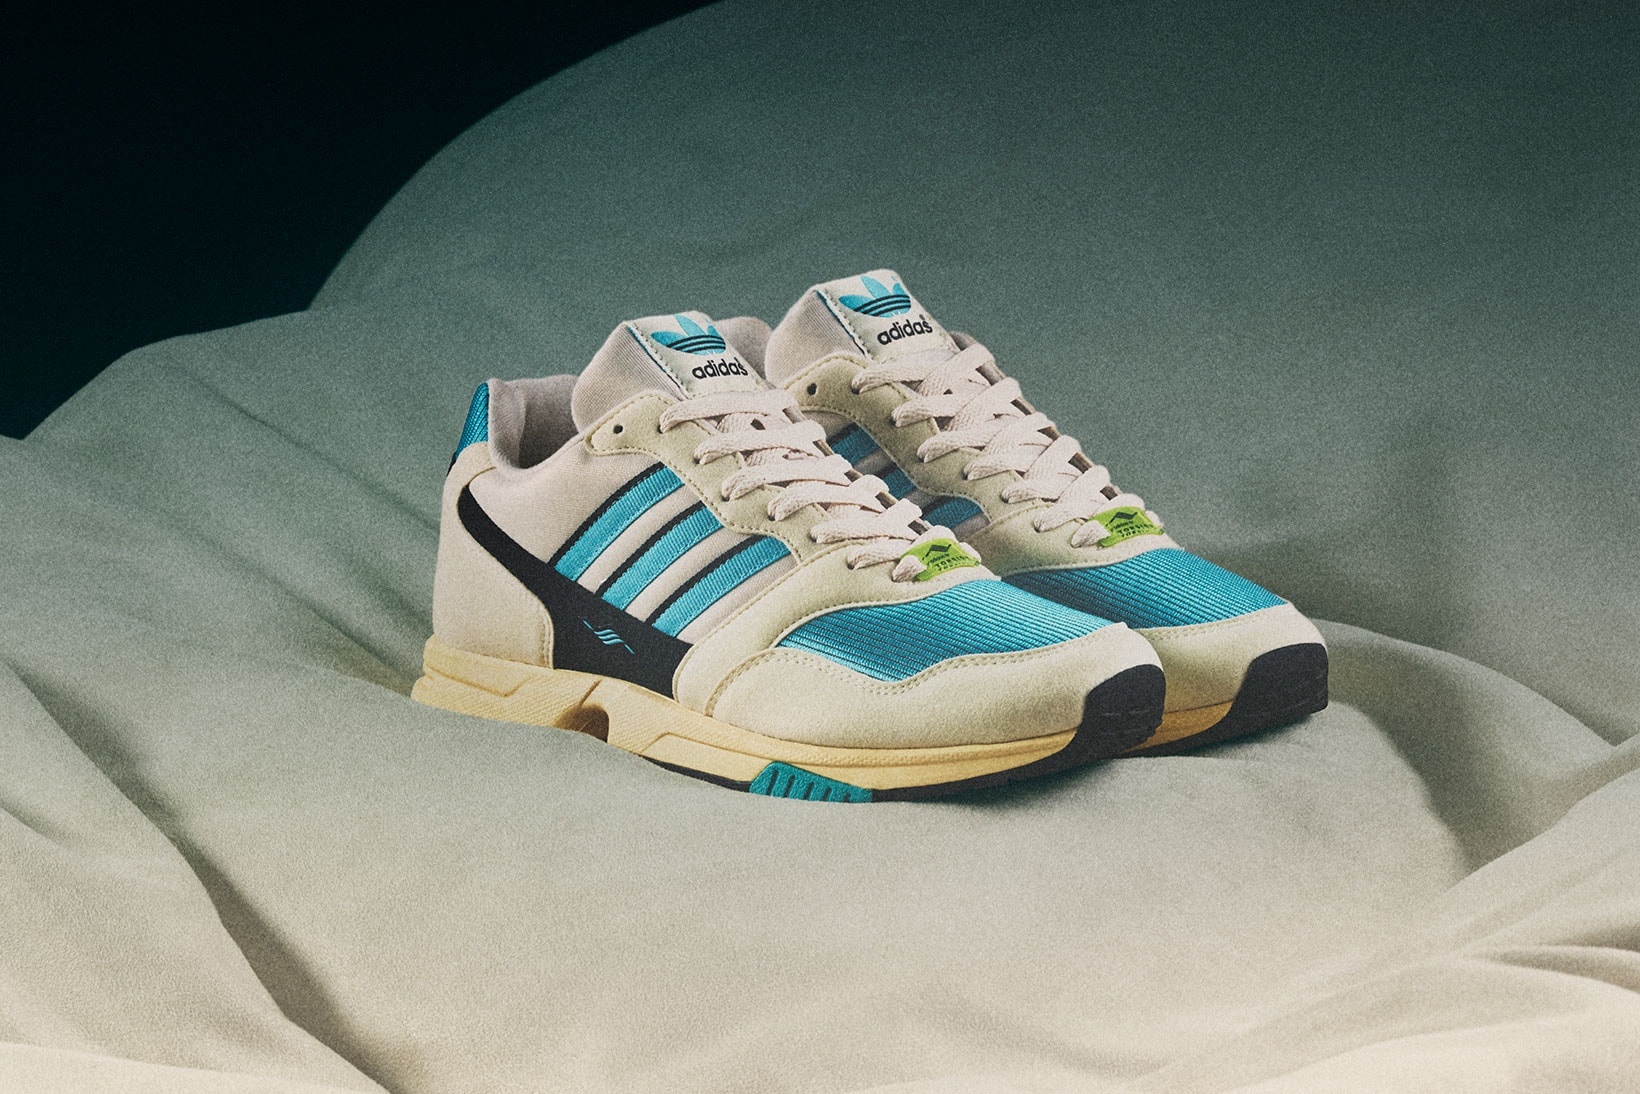 adidas originals a-zx series relaunch 1000c retro vintage 80s running shoes 